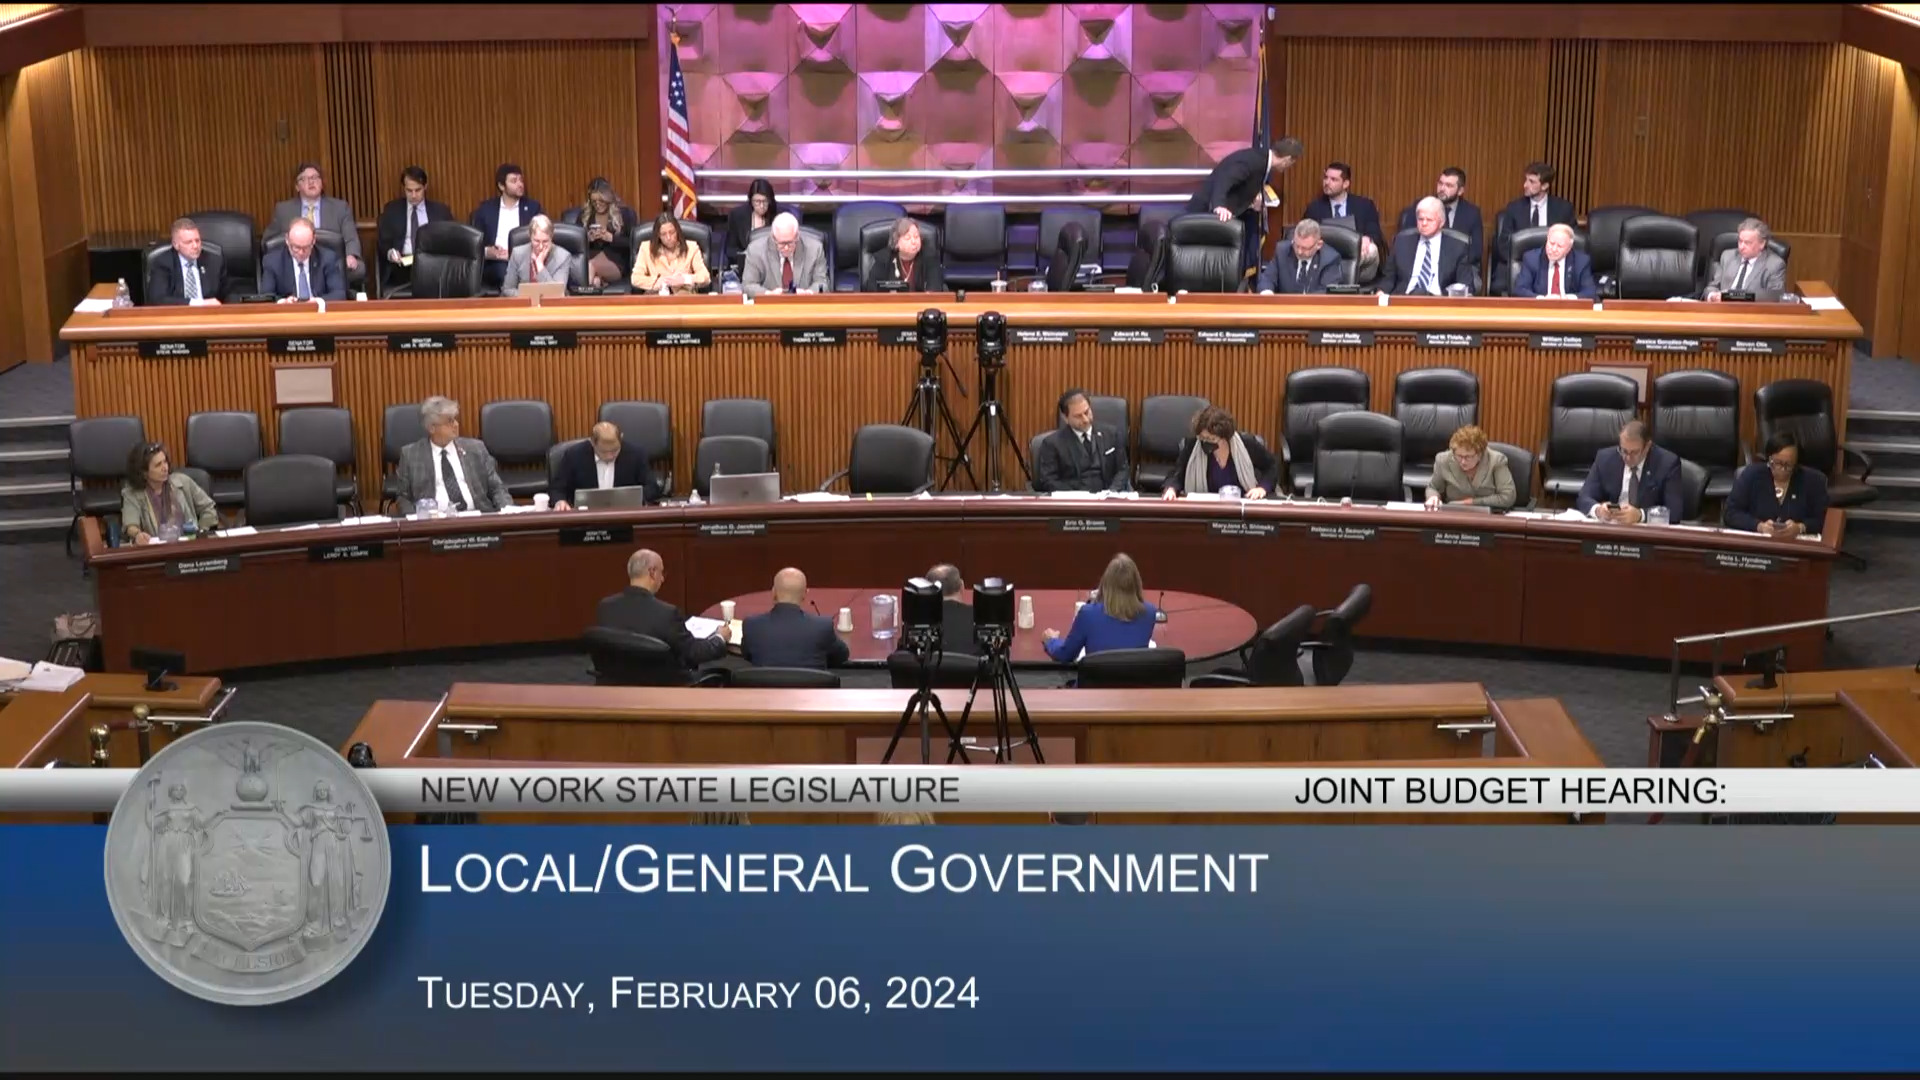 Advocates Testify During Budget Hearing on Local/General Government